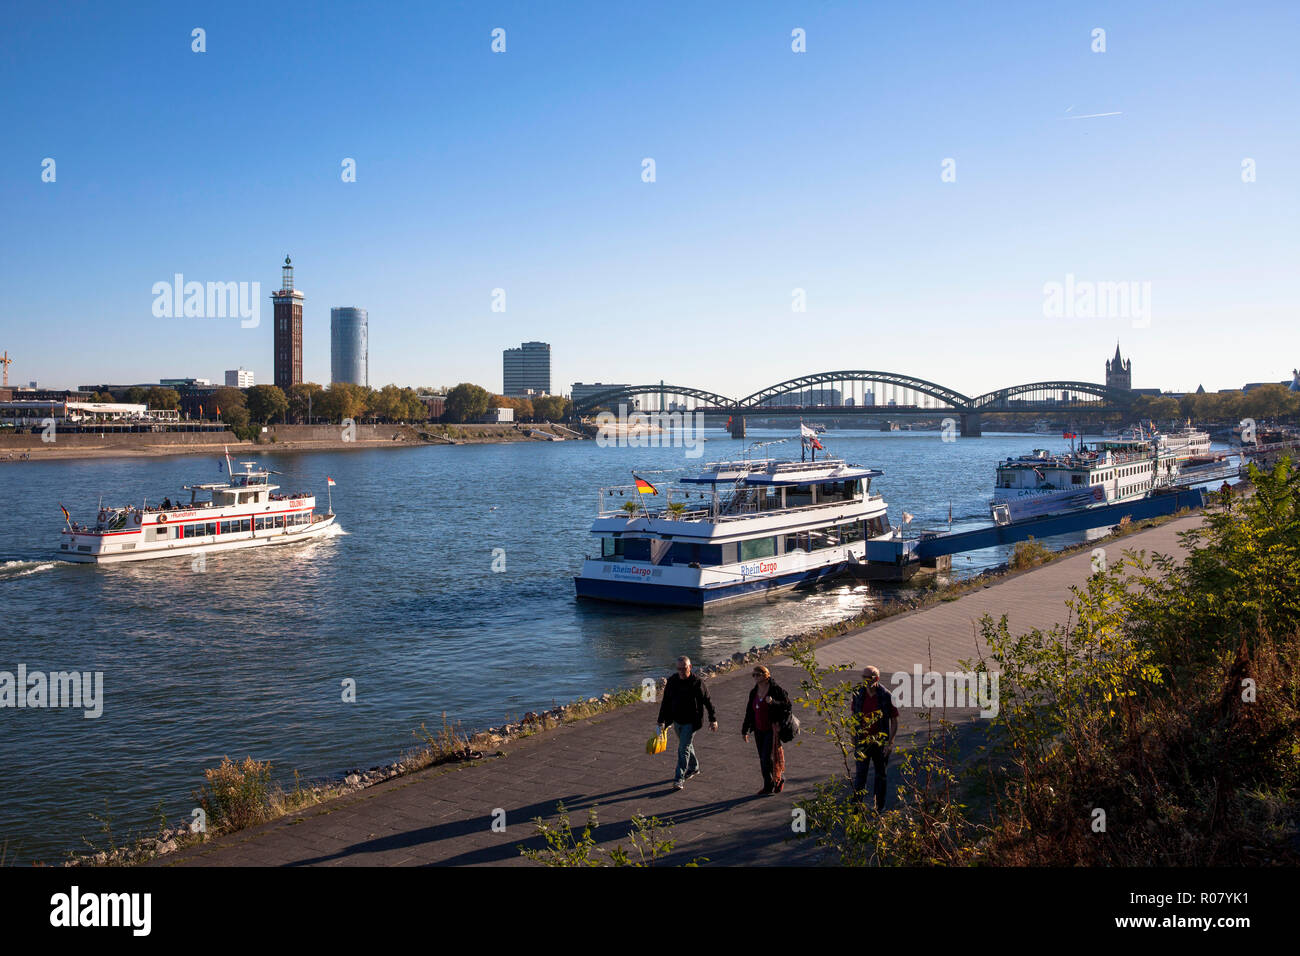 view across the river Rhine to the district Deutz, the old tower of the former exhibition center, the CologneTriangle skyscraper, the Lanxess Tower, t Stock Photo